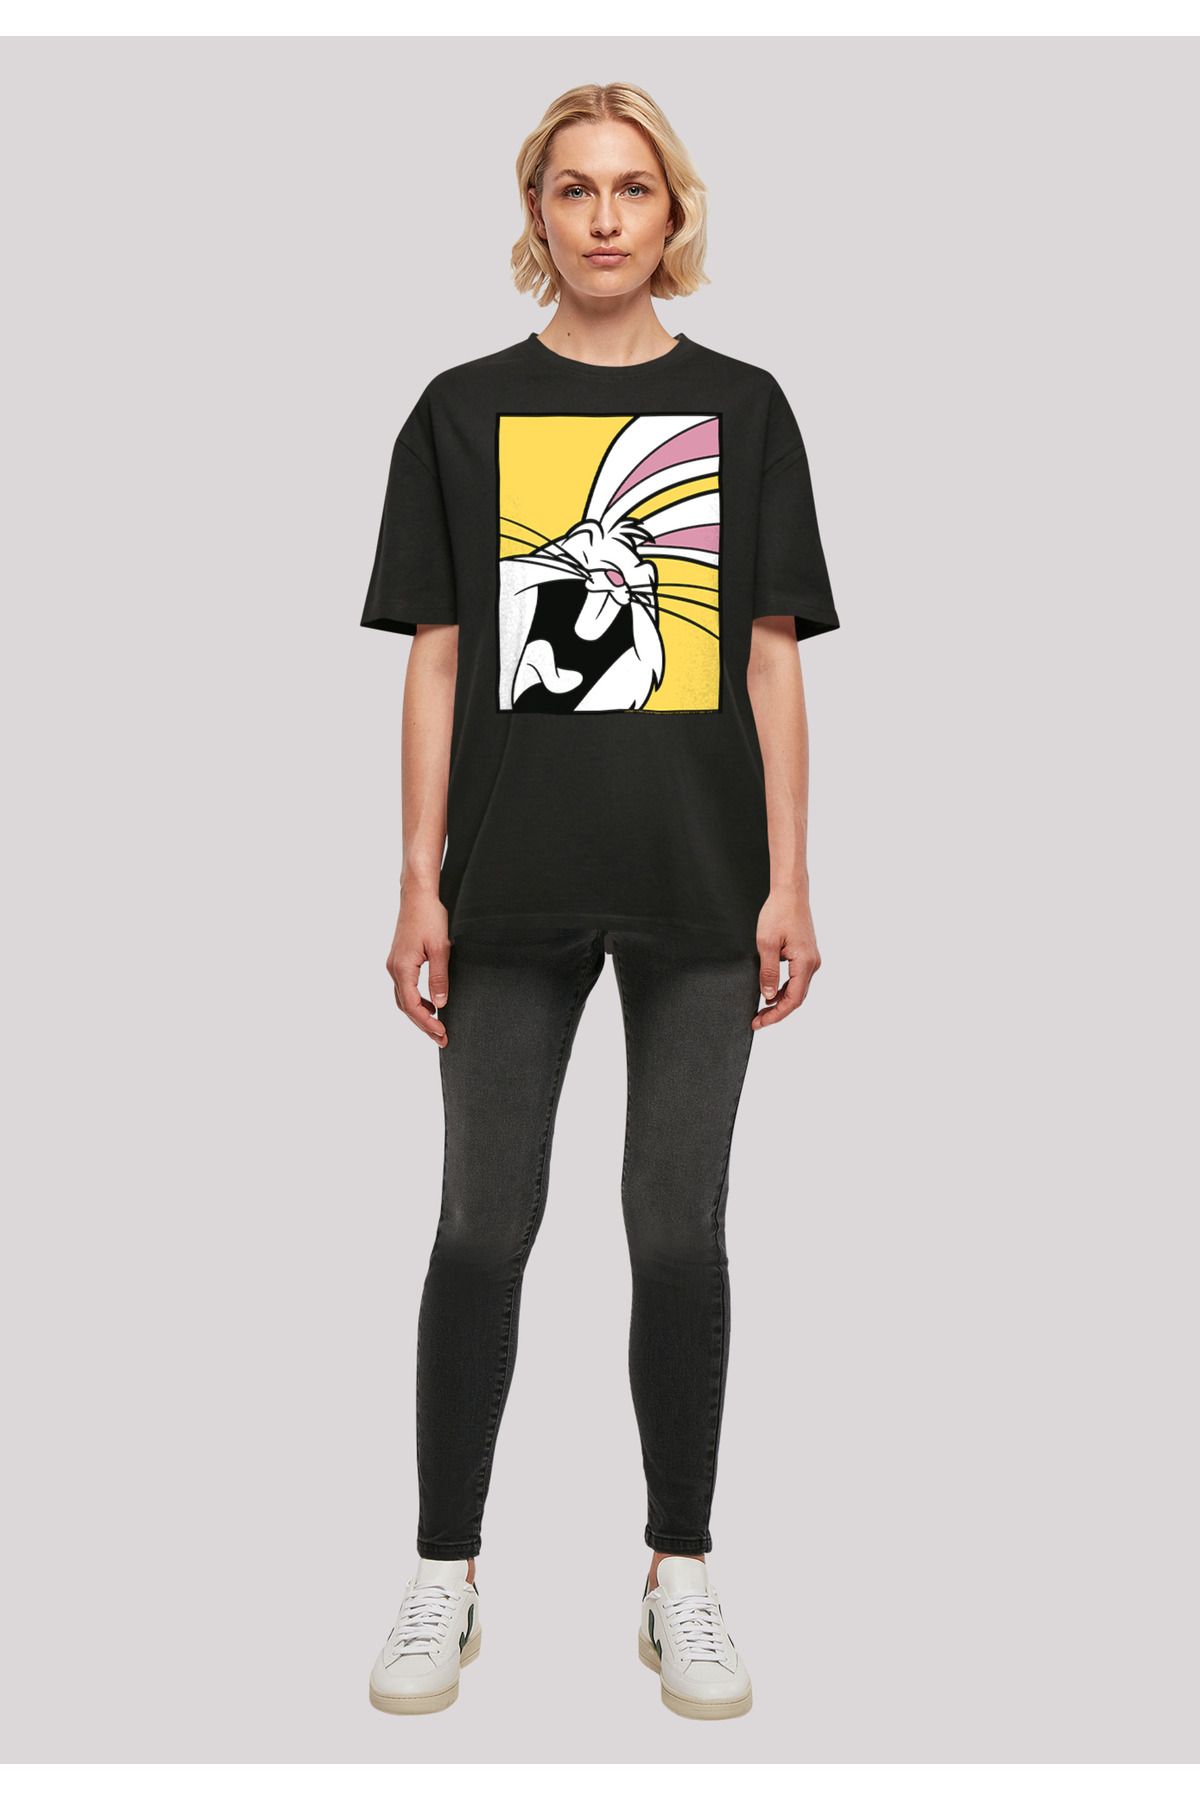 F4NT4STIC T-Shirt - Oversized Bunny Boyfriend Tunes Trendyol with Looney Ladies Damen Laughing Bugs